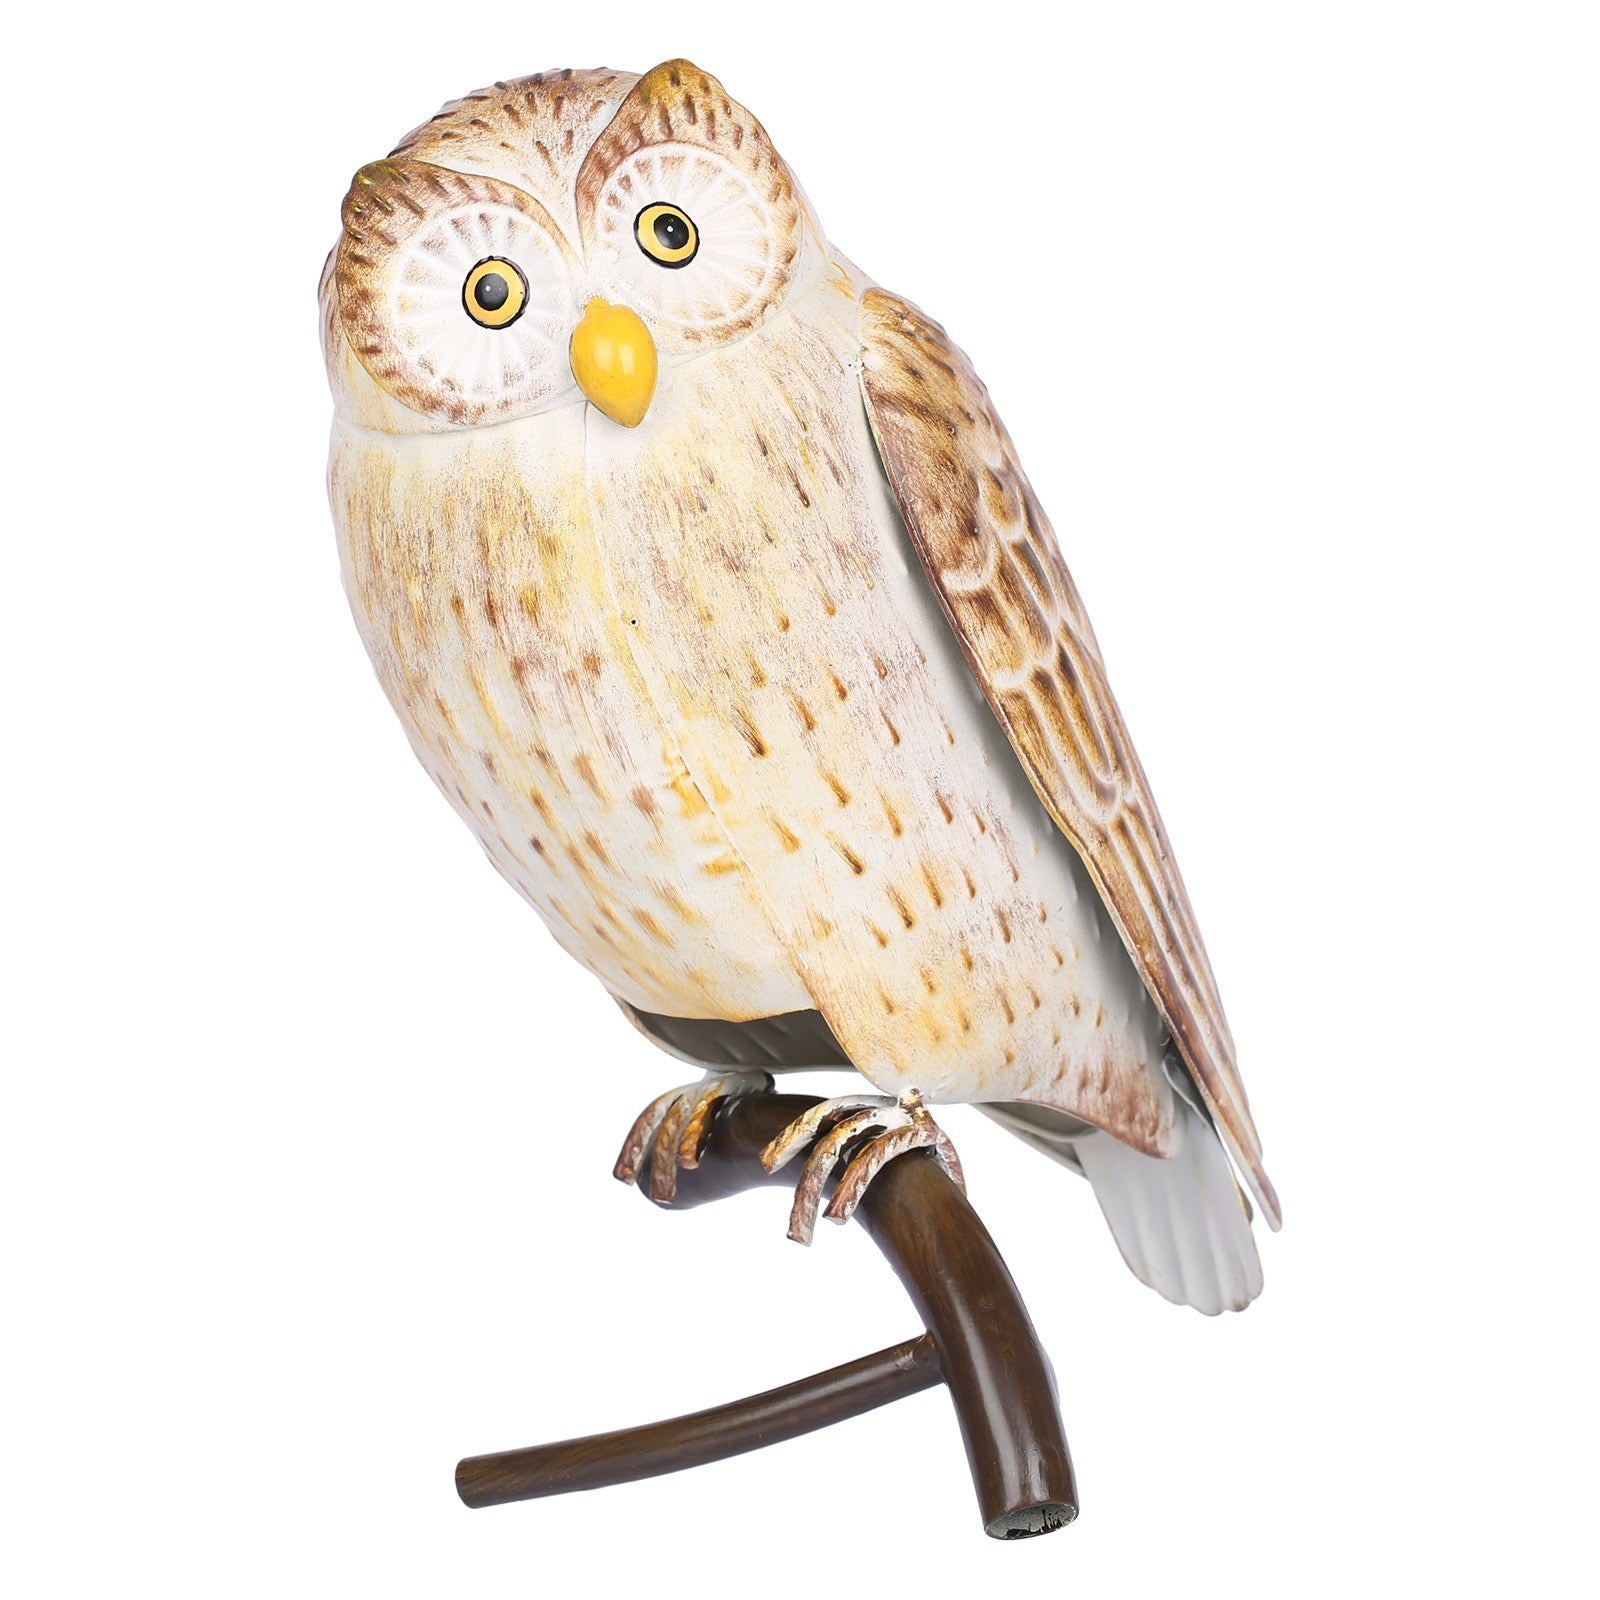 Owl figurine with a cheerful and creative design